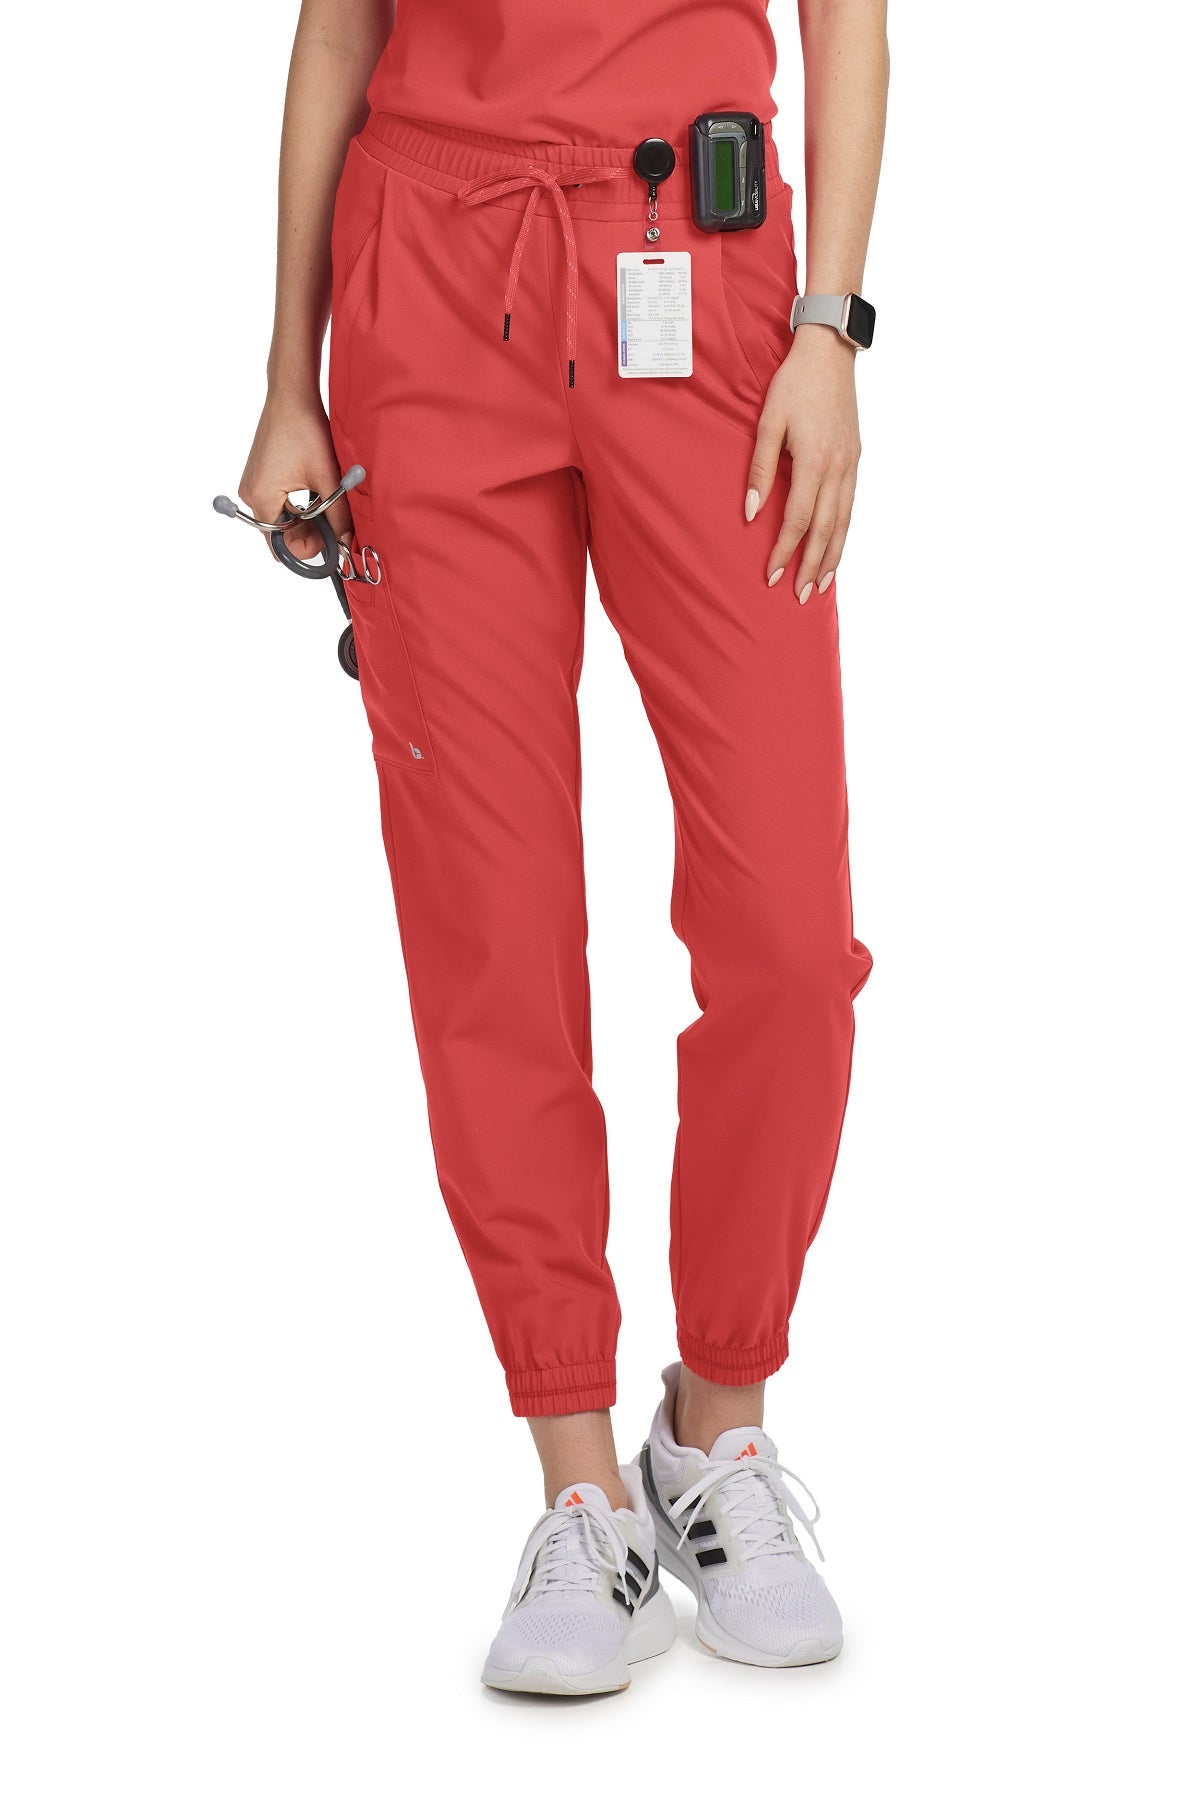 Barco Unify Scrub Pants Mission Jogger Regular Length in Dusty Red at Parker's Clothing and Shoes.